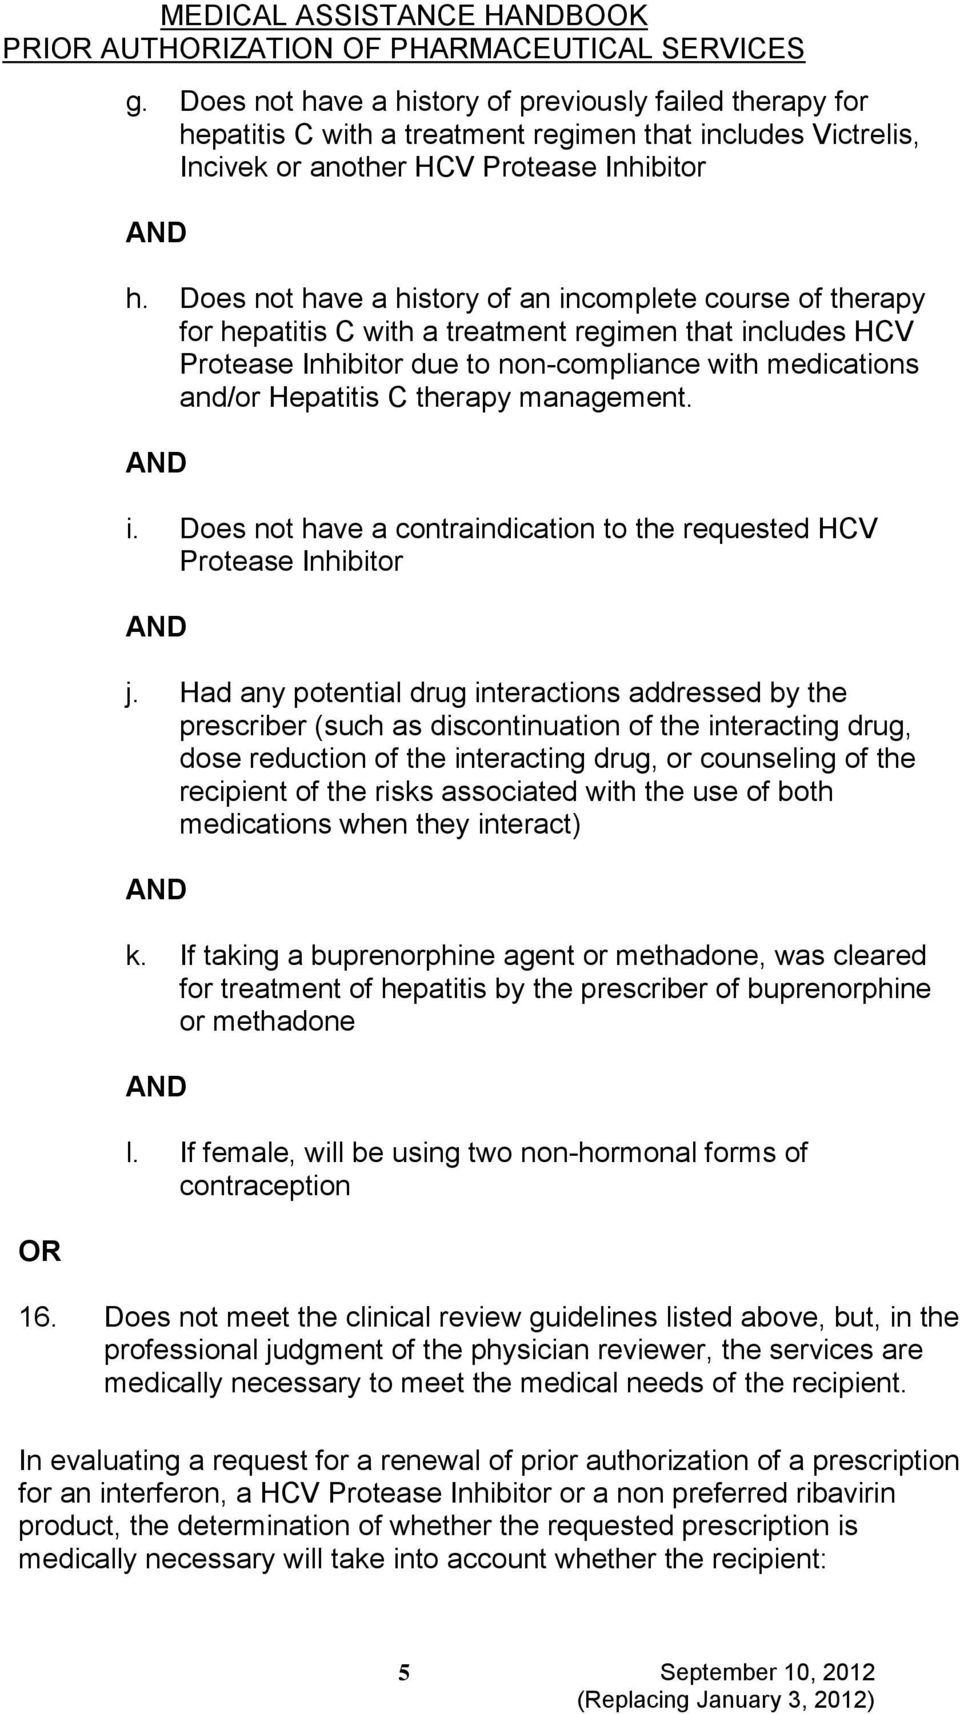 Does not have a history of an incomplete course of therapy for hepatitis C with a treatment regimen that includes HCV Protease Inhibitor due to non-compliance with medications and/or Hepatitis C